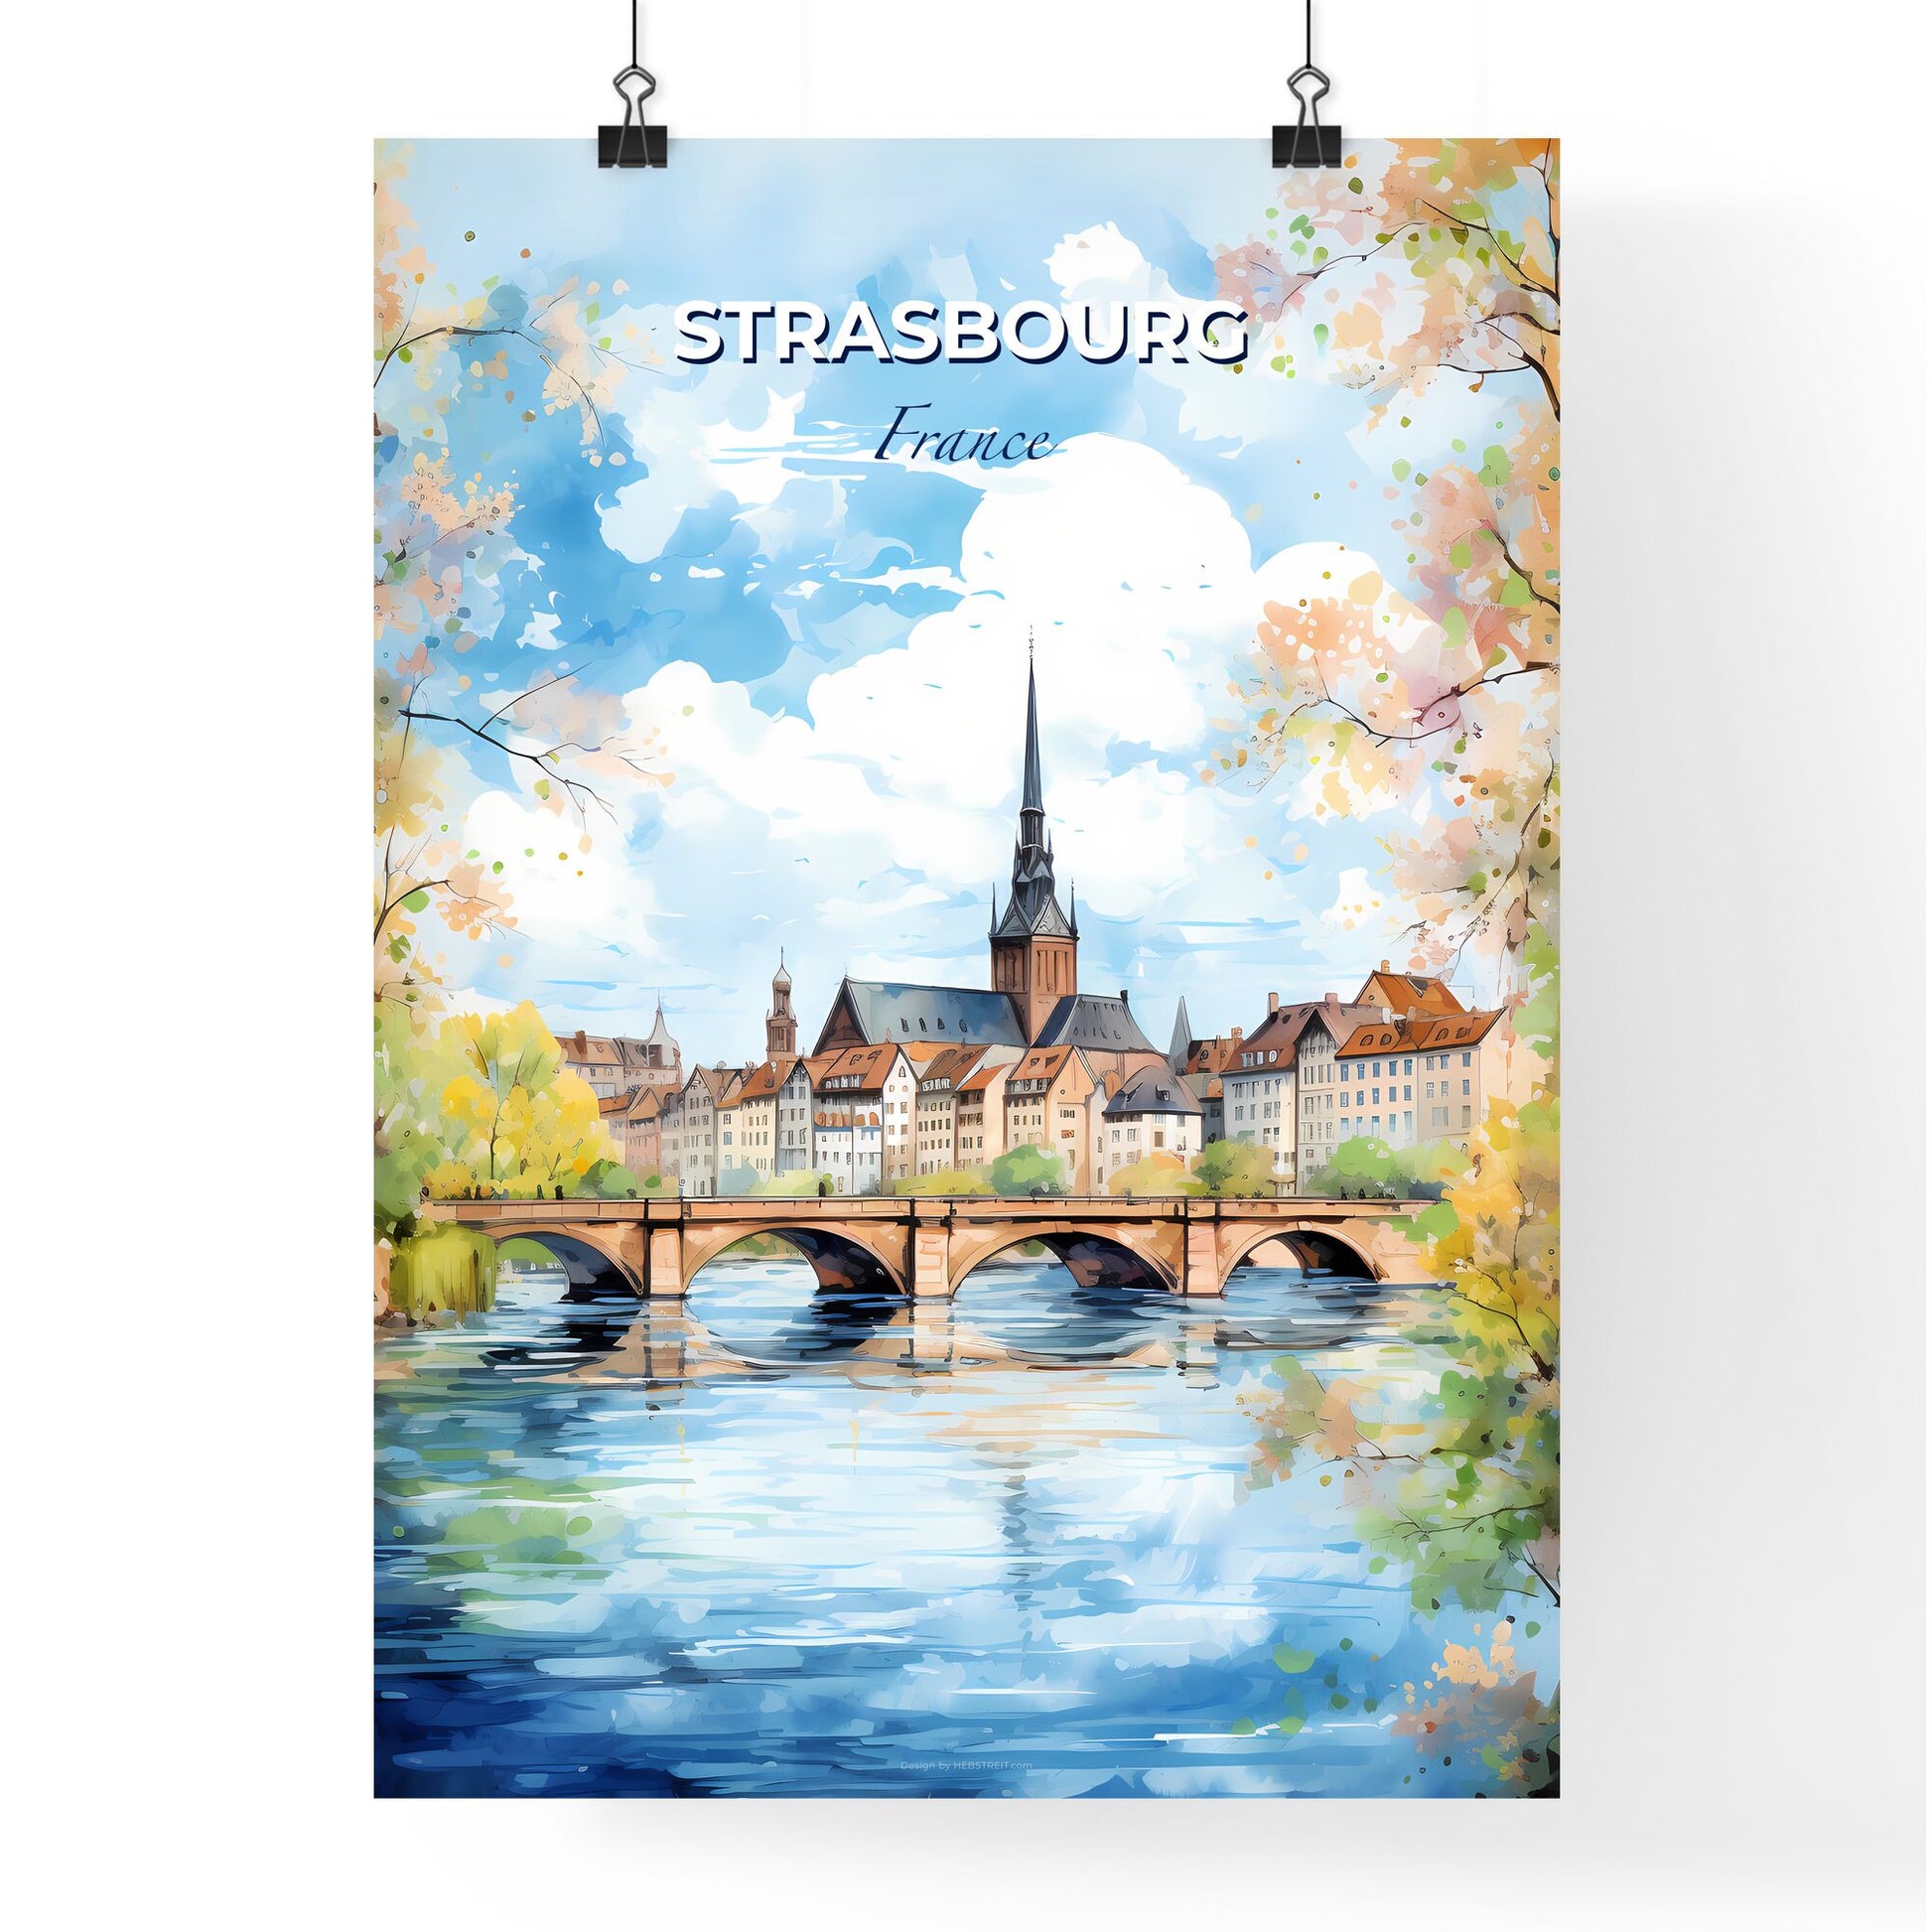 Strasbourg France Skyline - A Watercolor Of A Bridge Over A River With Buildings And Trees - Customizable Travel Gift Default Title